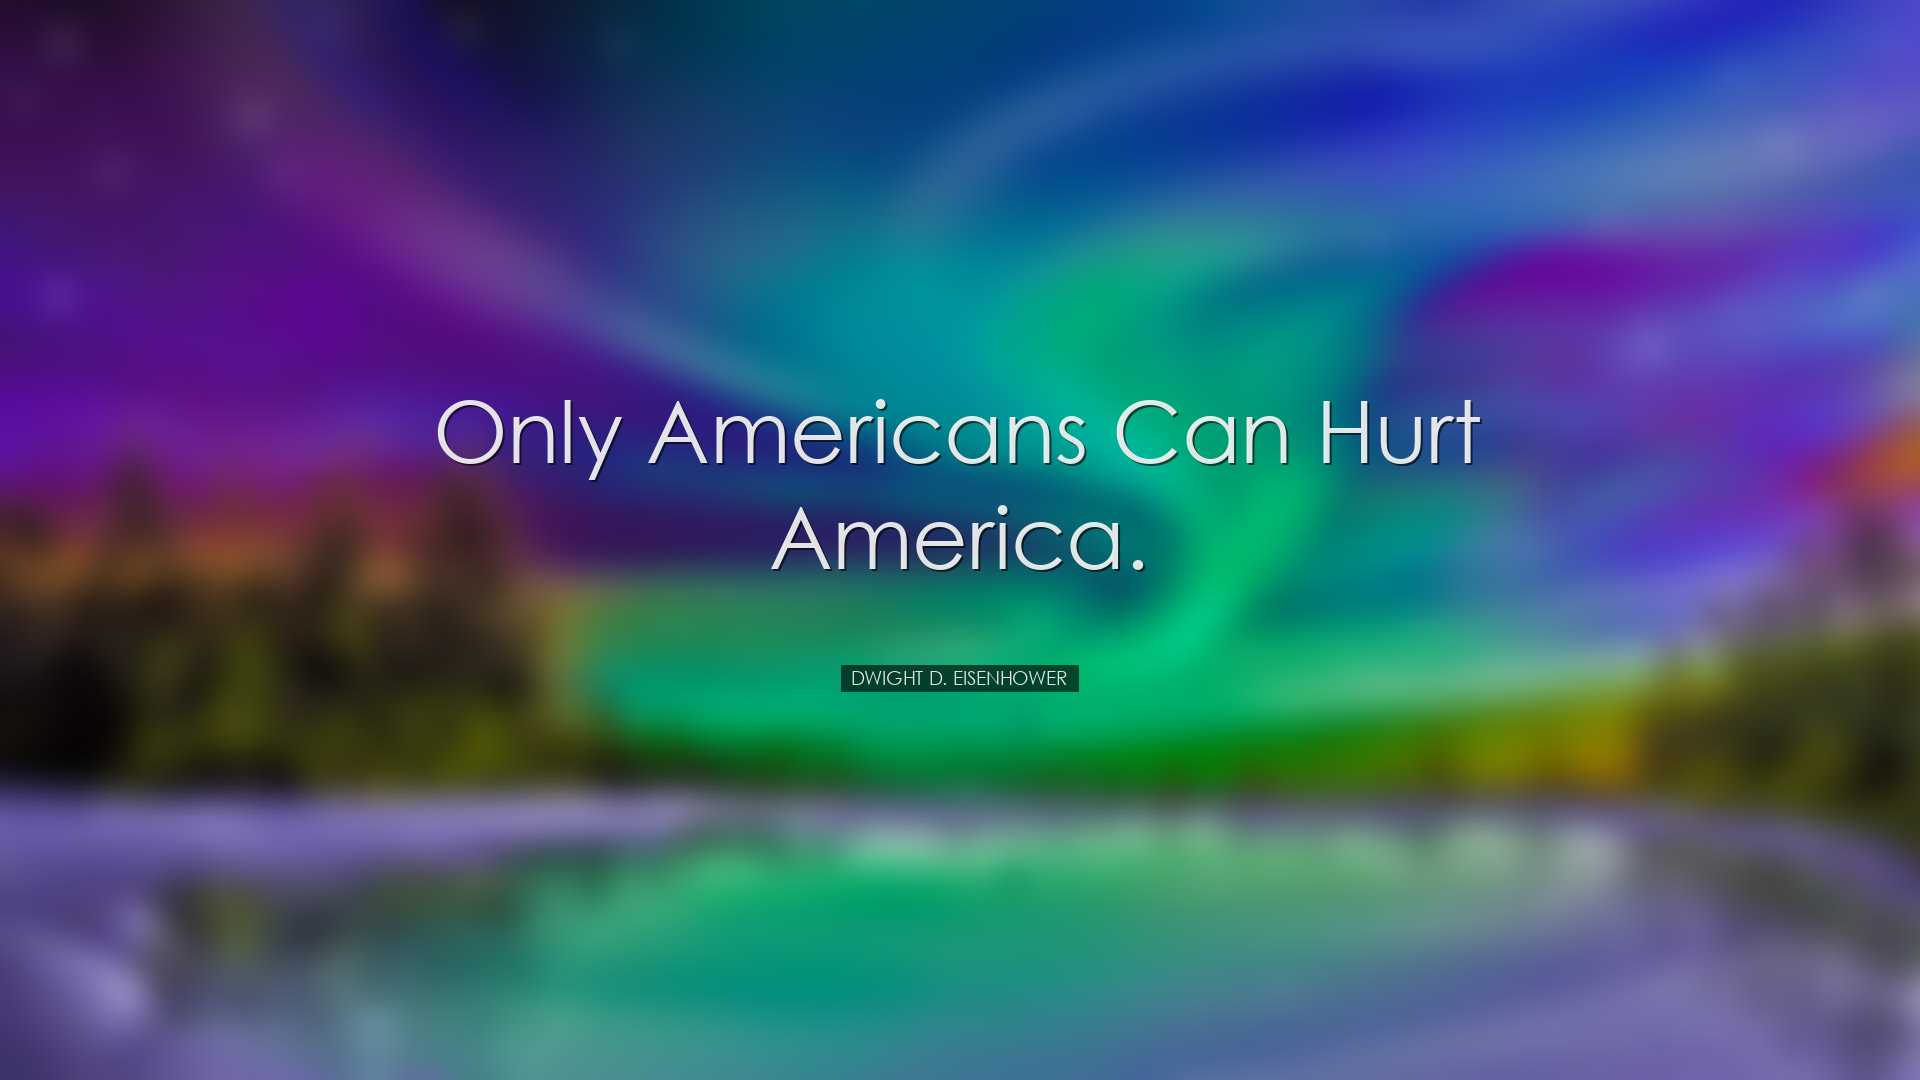 Only Americans can hurt America. - Dwight D. Eisenhower